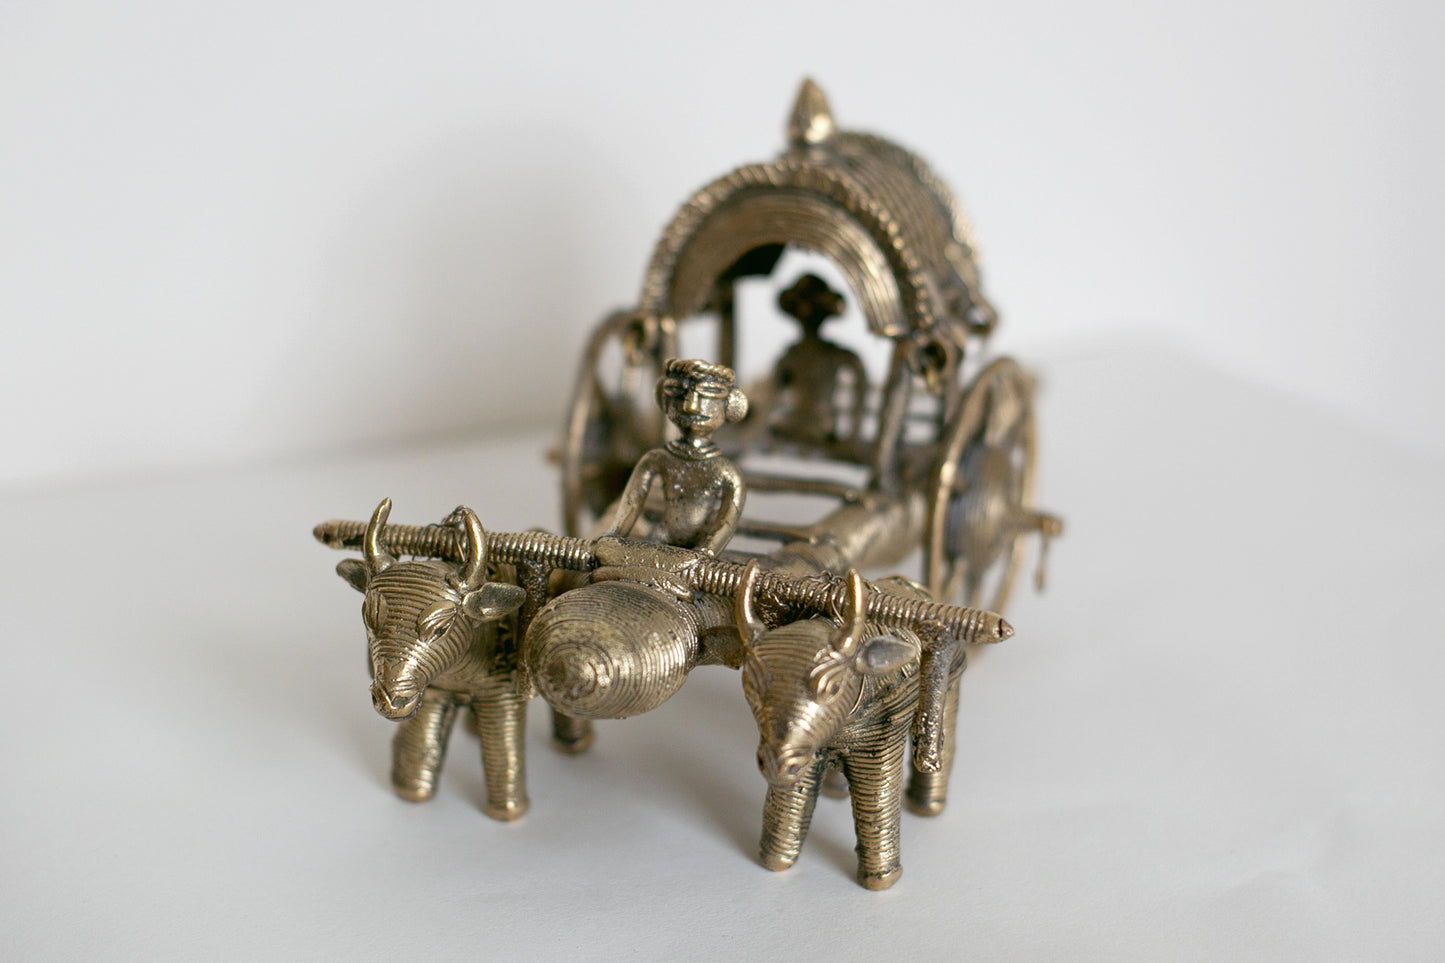 Dhokra Casted Bullock Cart Made by Tribal Artisans